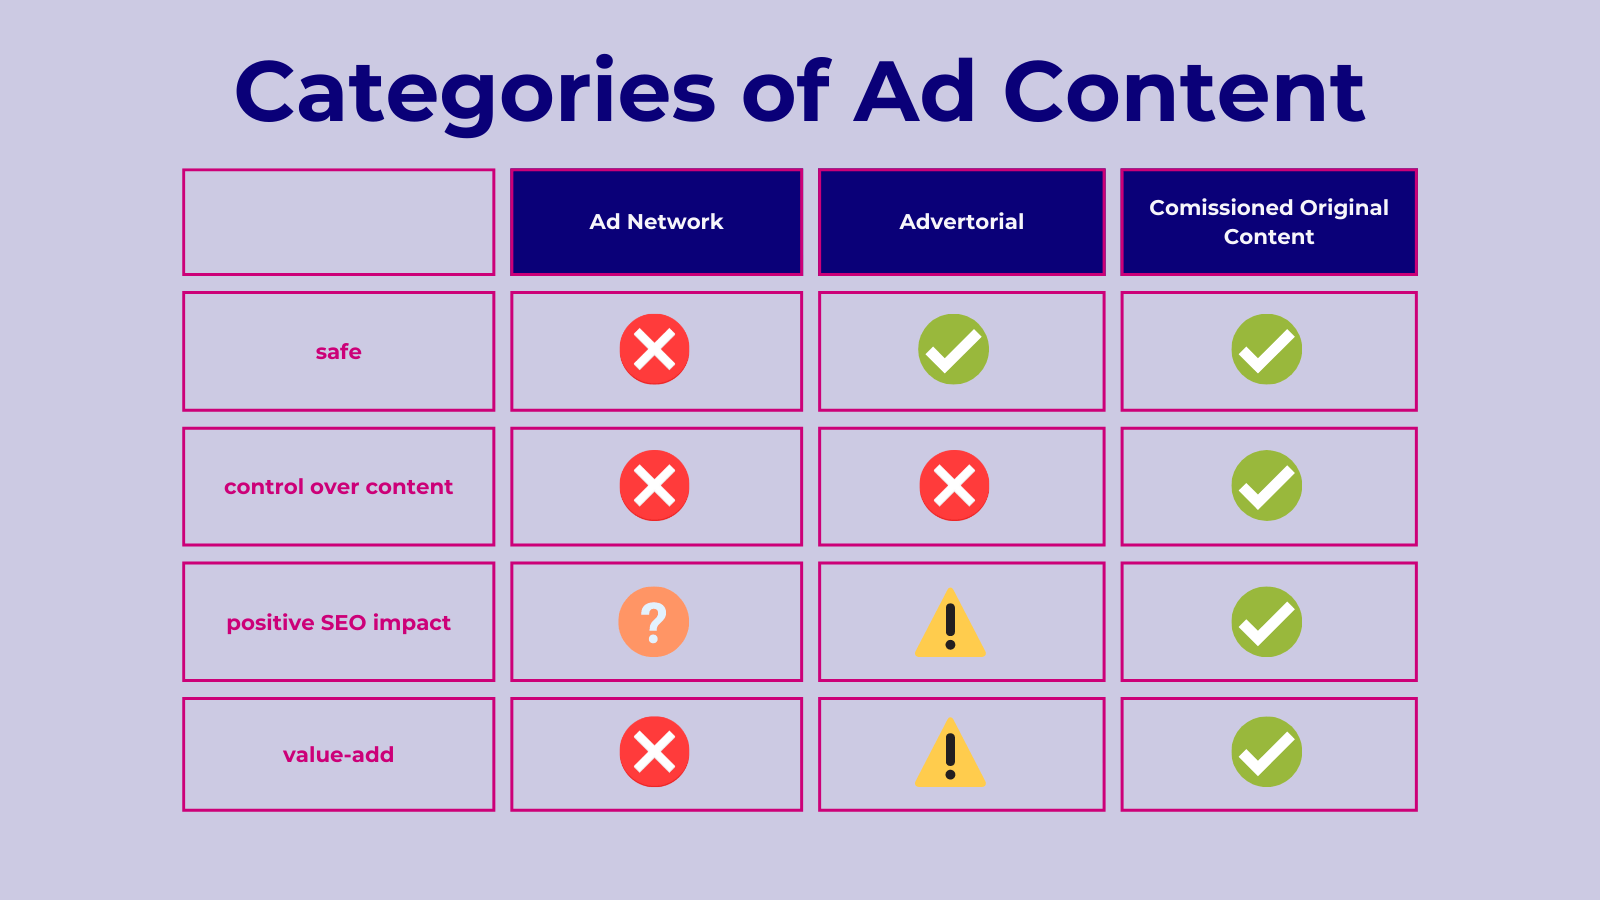 Simplified Ad source categories based on content source